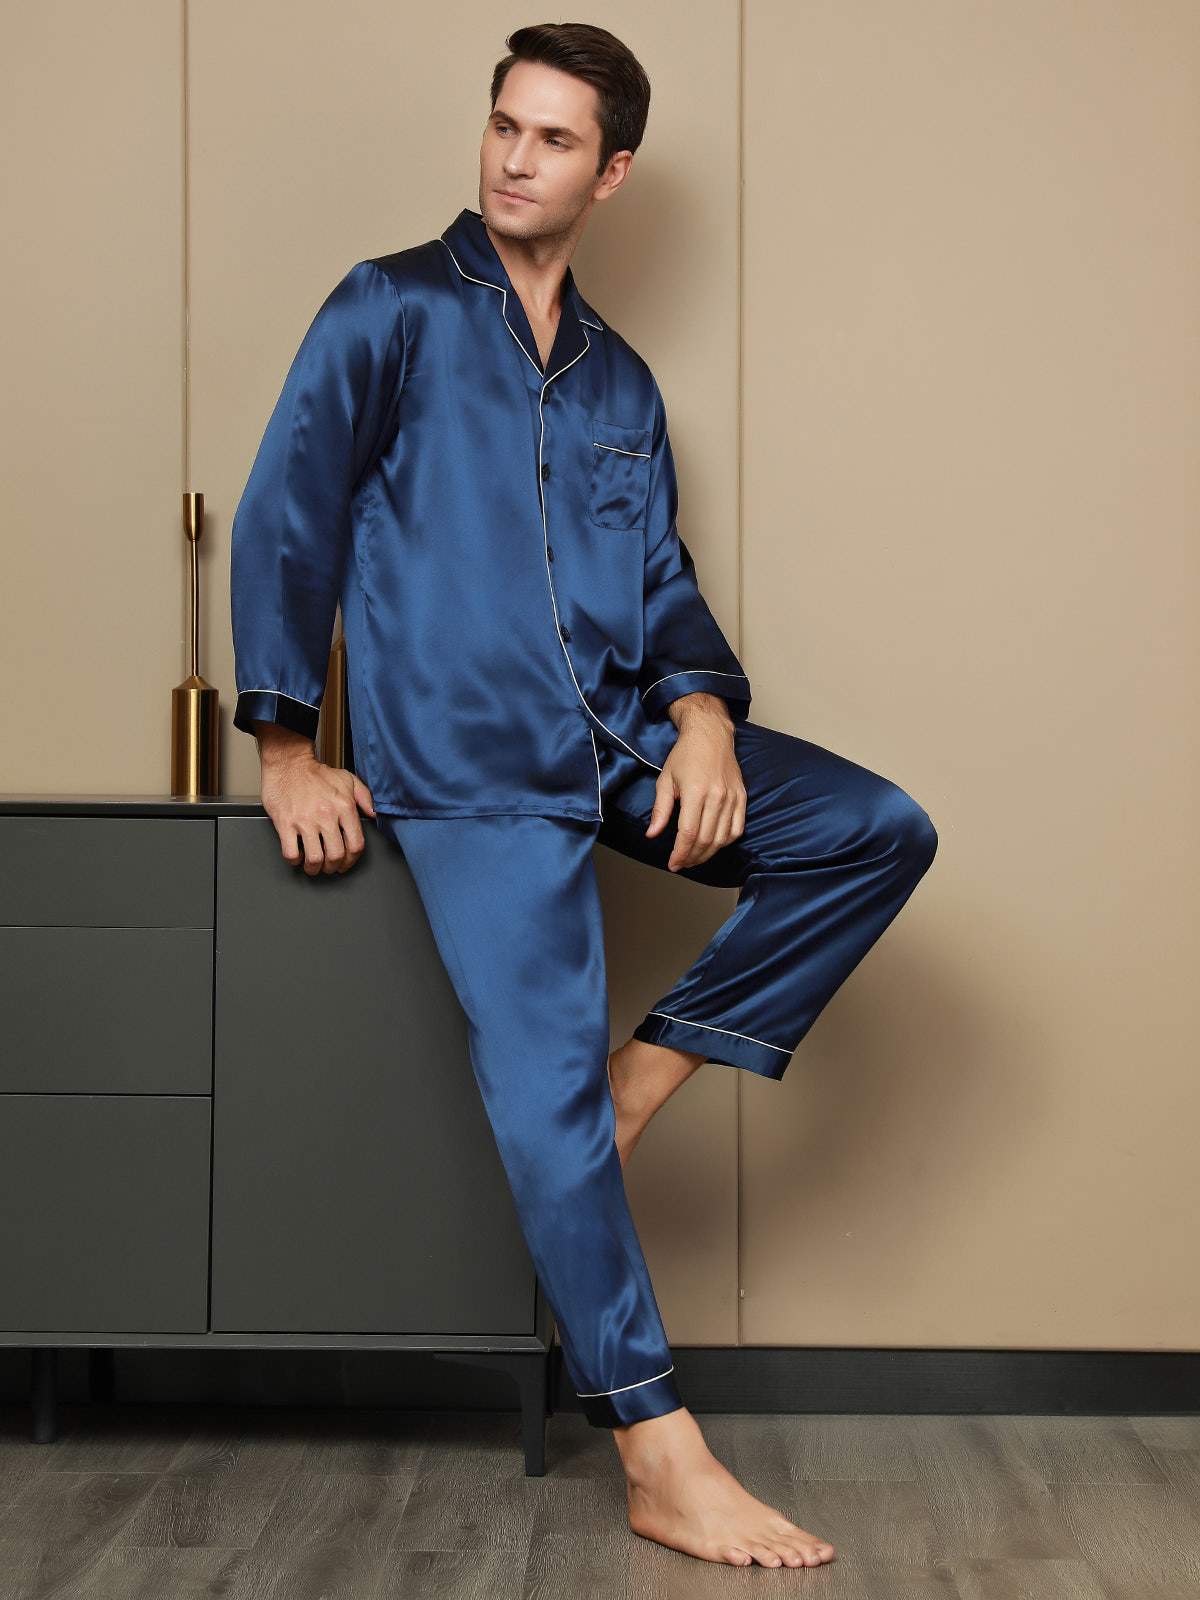 10 best affordable silk pajamas for women and men